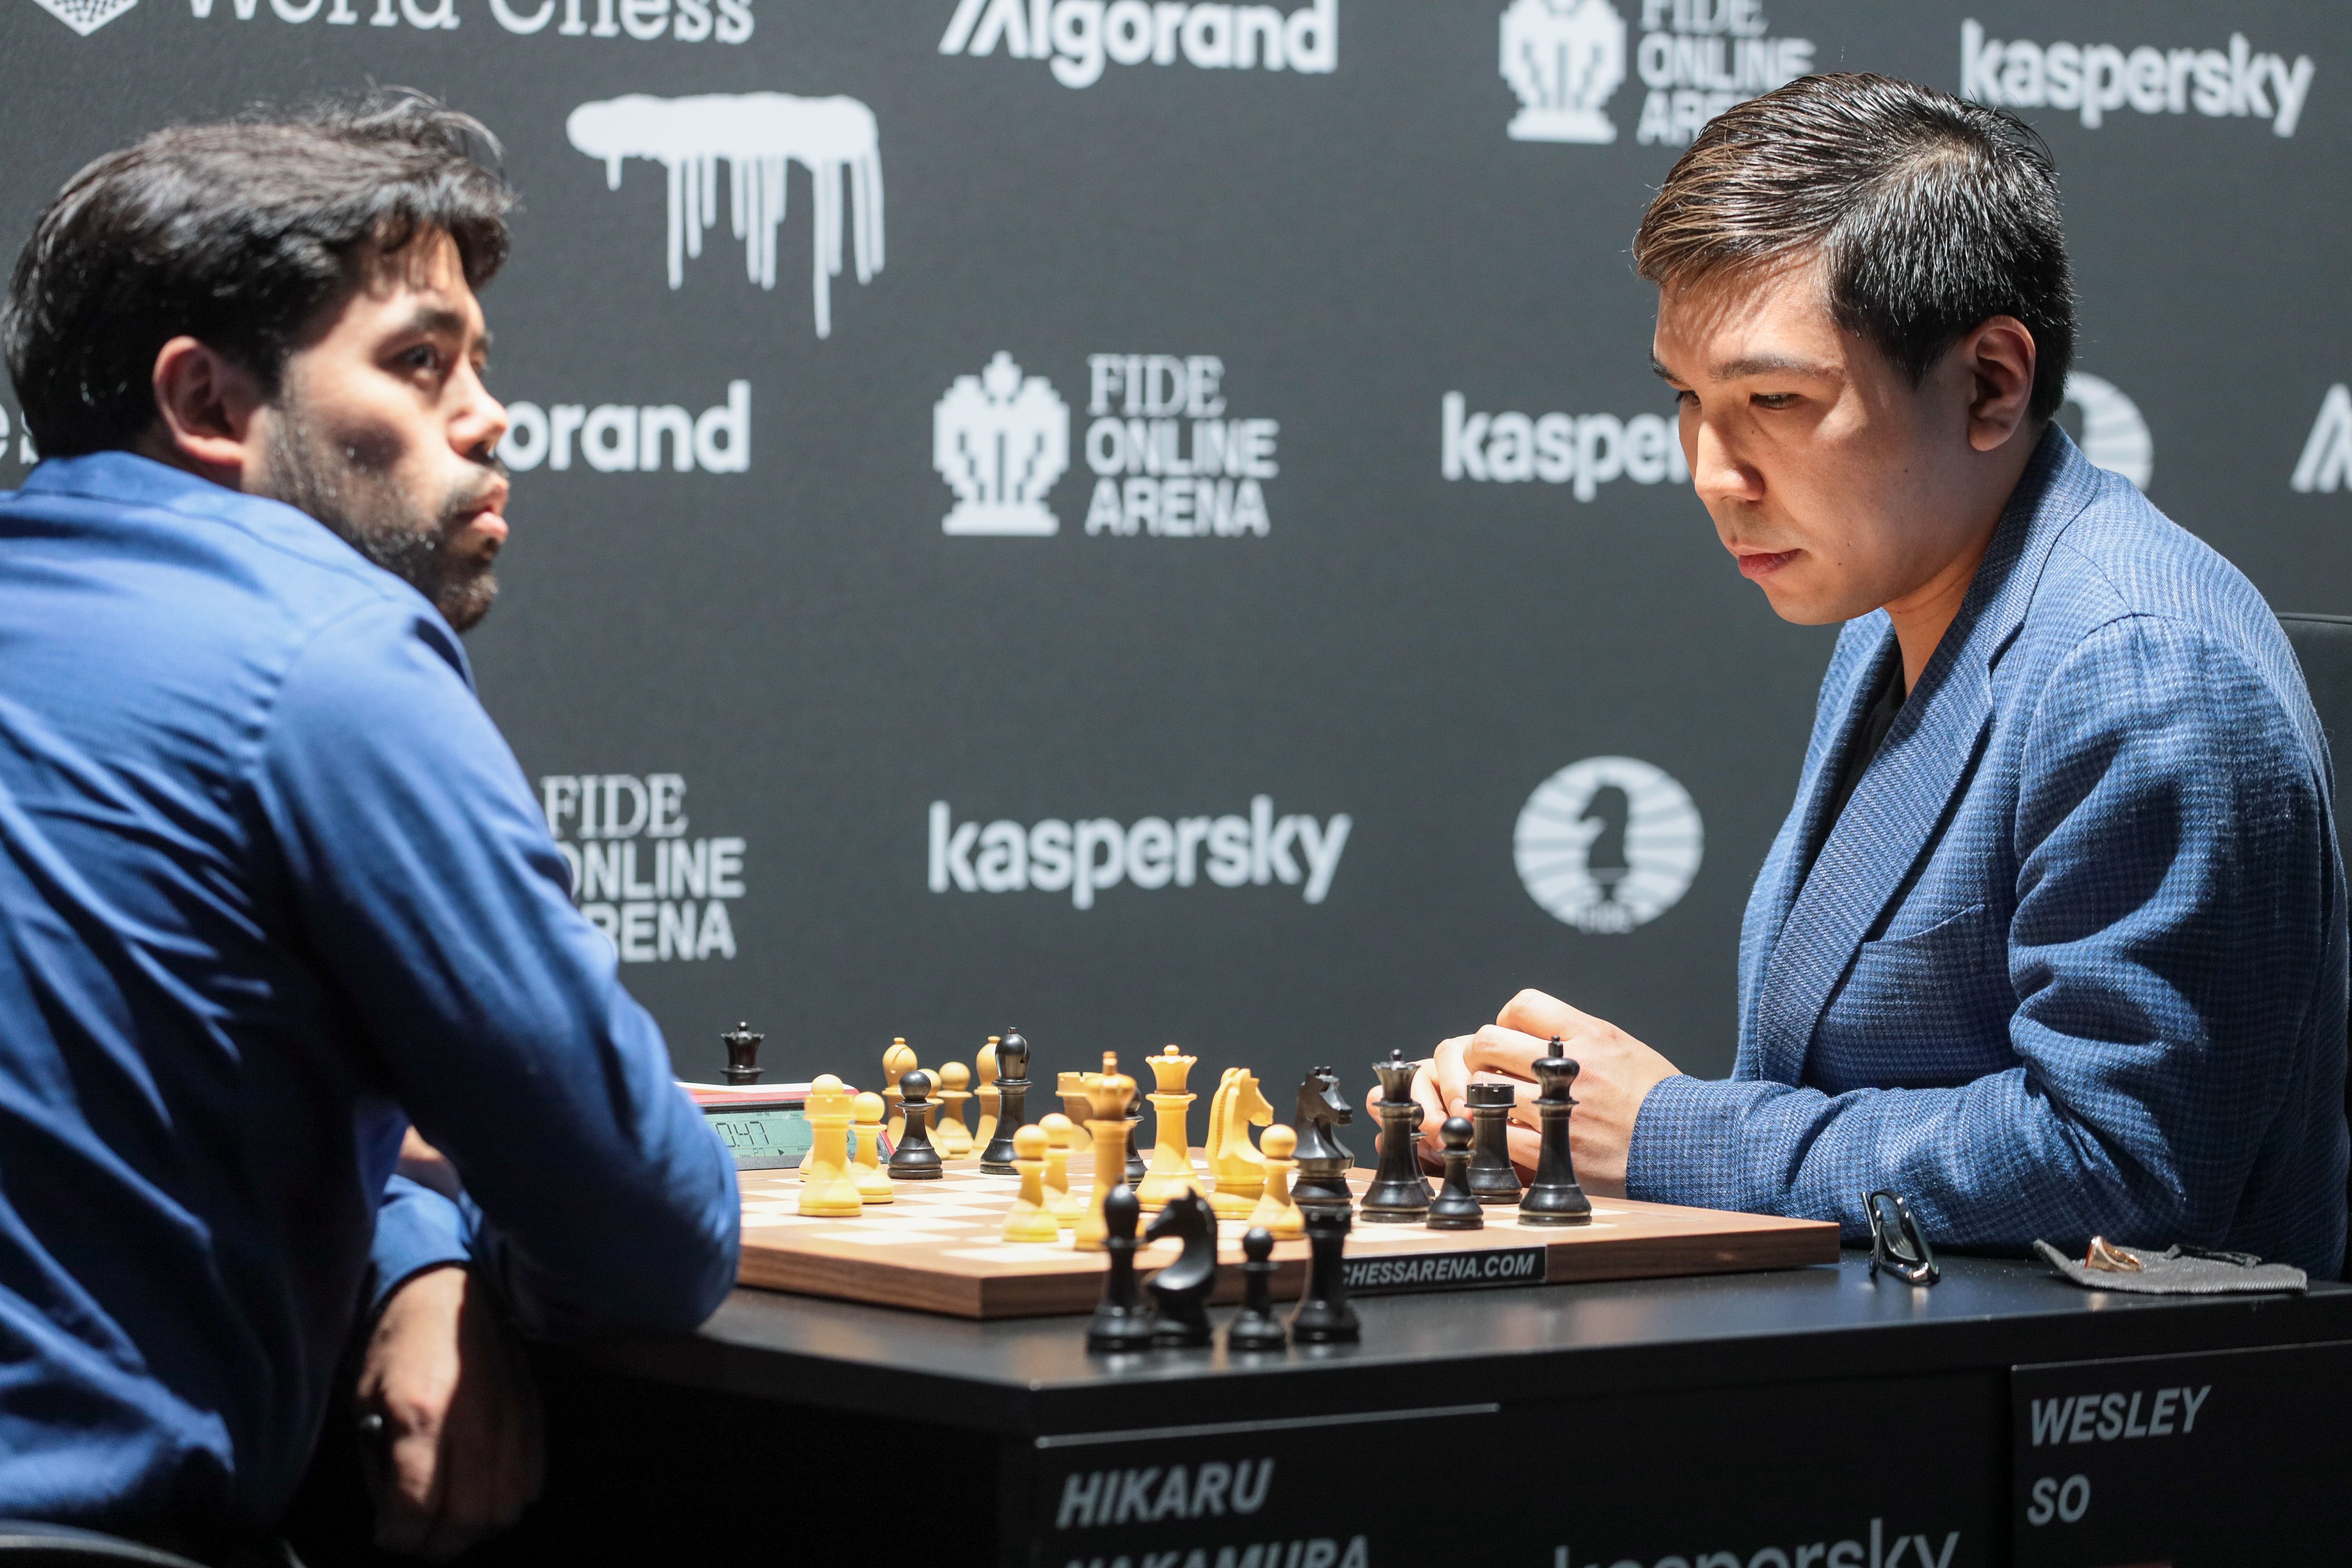 Chess.com on X: Congratulations to Wesley So, the FIRST player to advance  to the 2021 Speed Chess Championship finals after winning a SUPER close  semifinal battle! 👏 Final score: So: 15.0 Nihal